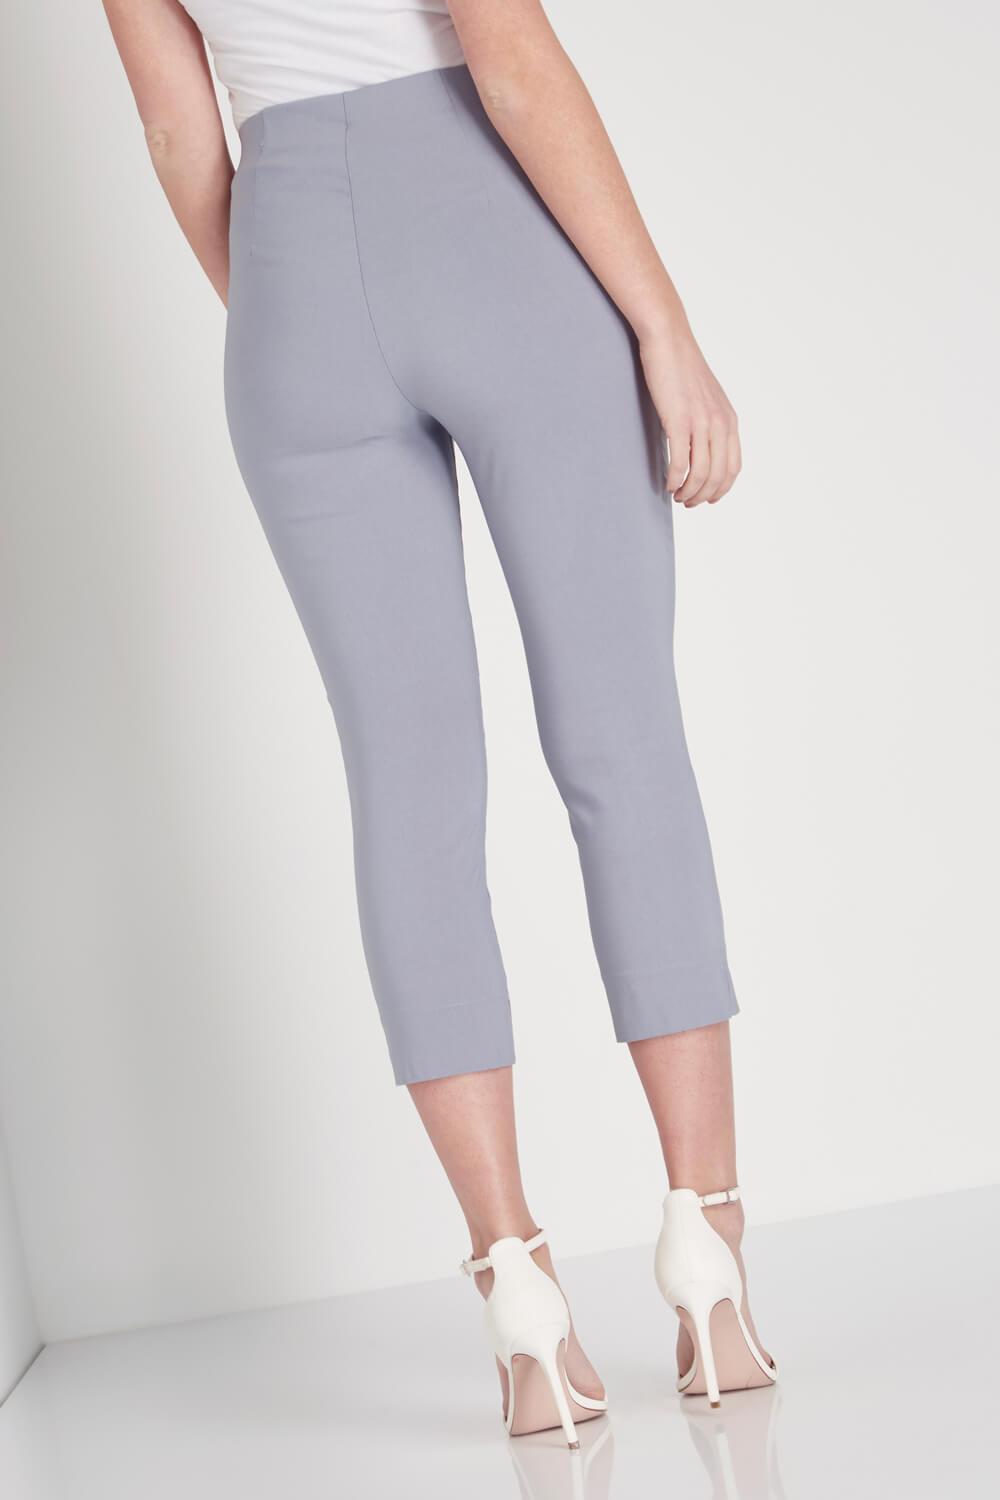 Light Grey Cropped Stretch Trouser, Image 2 of 4